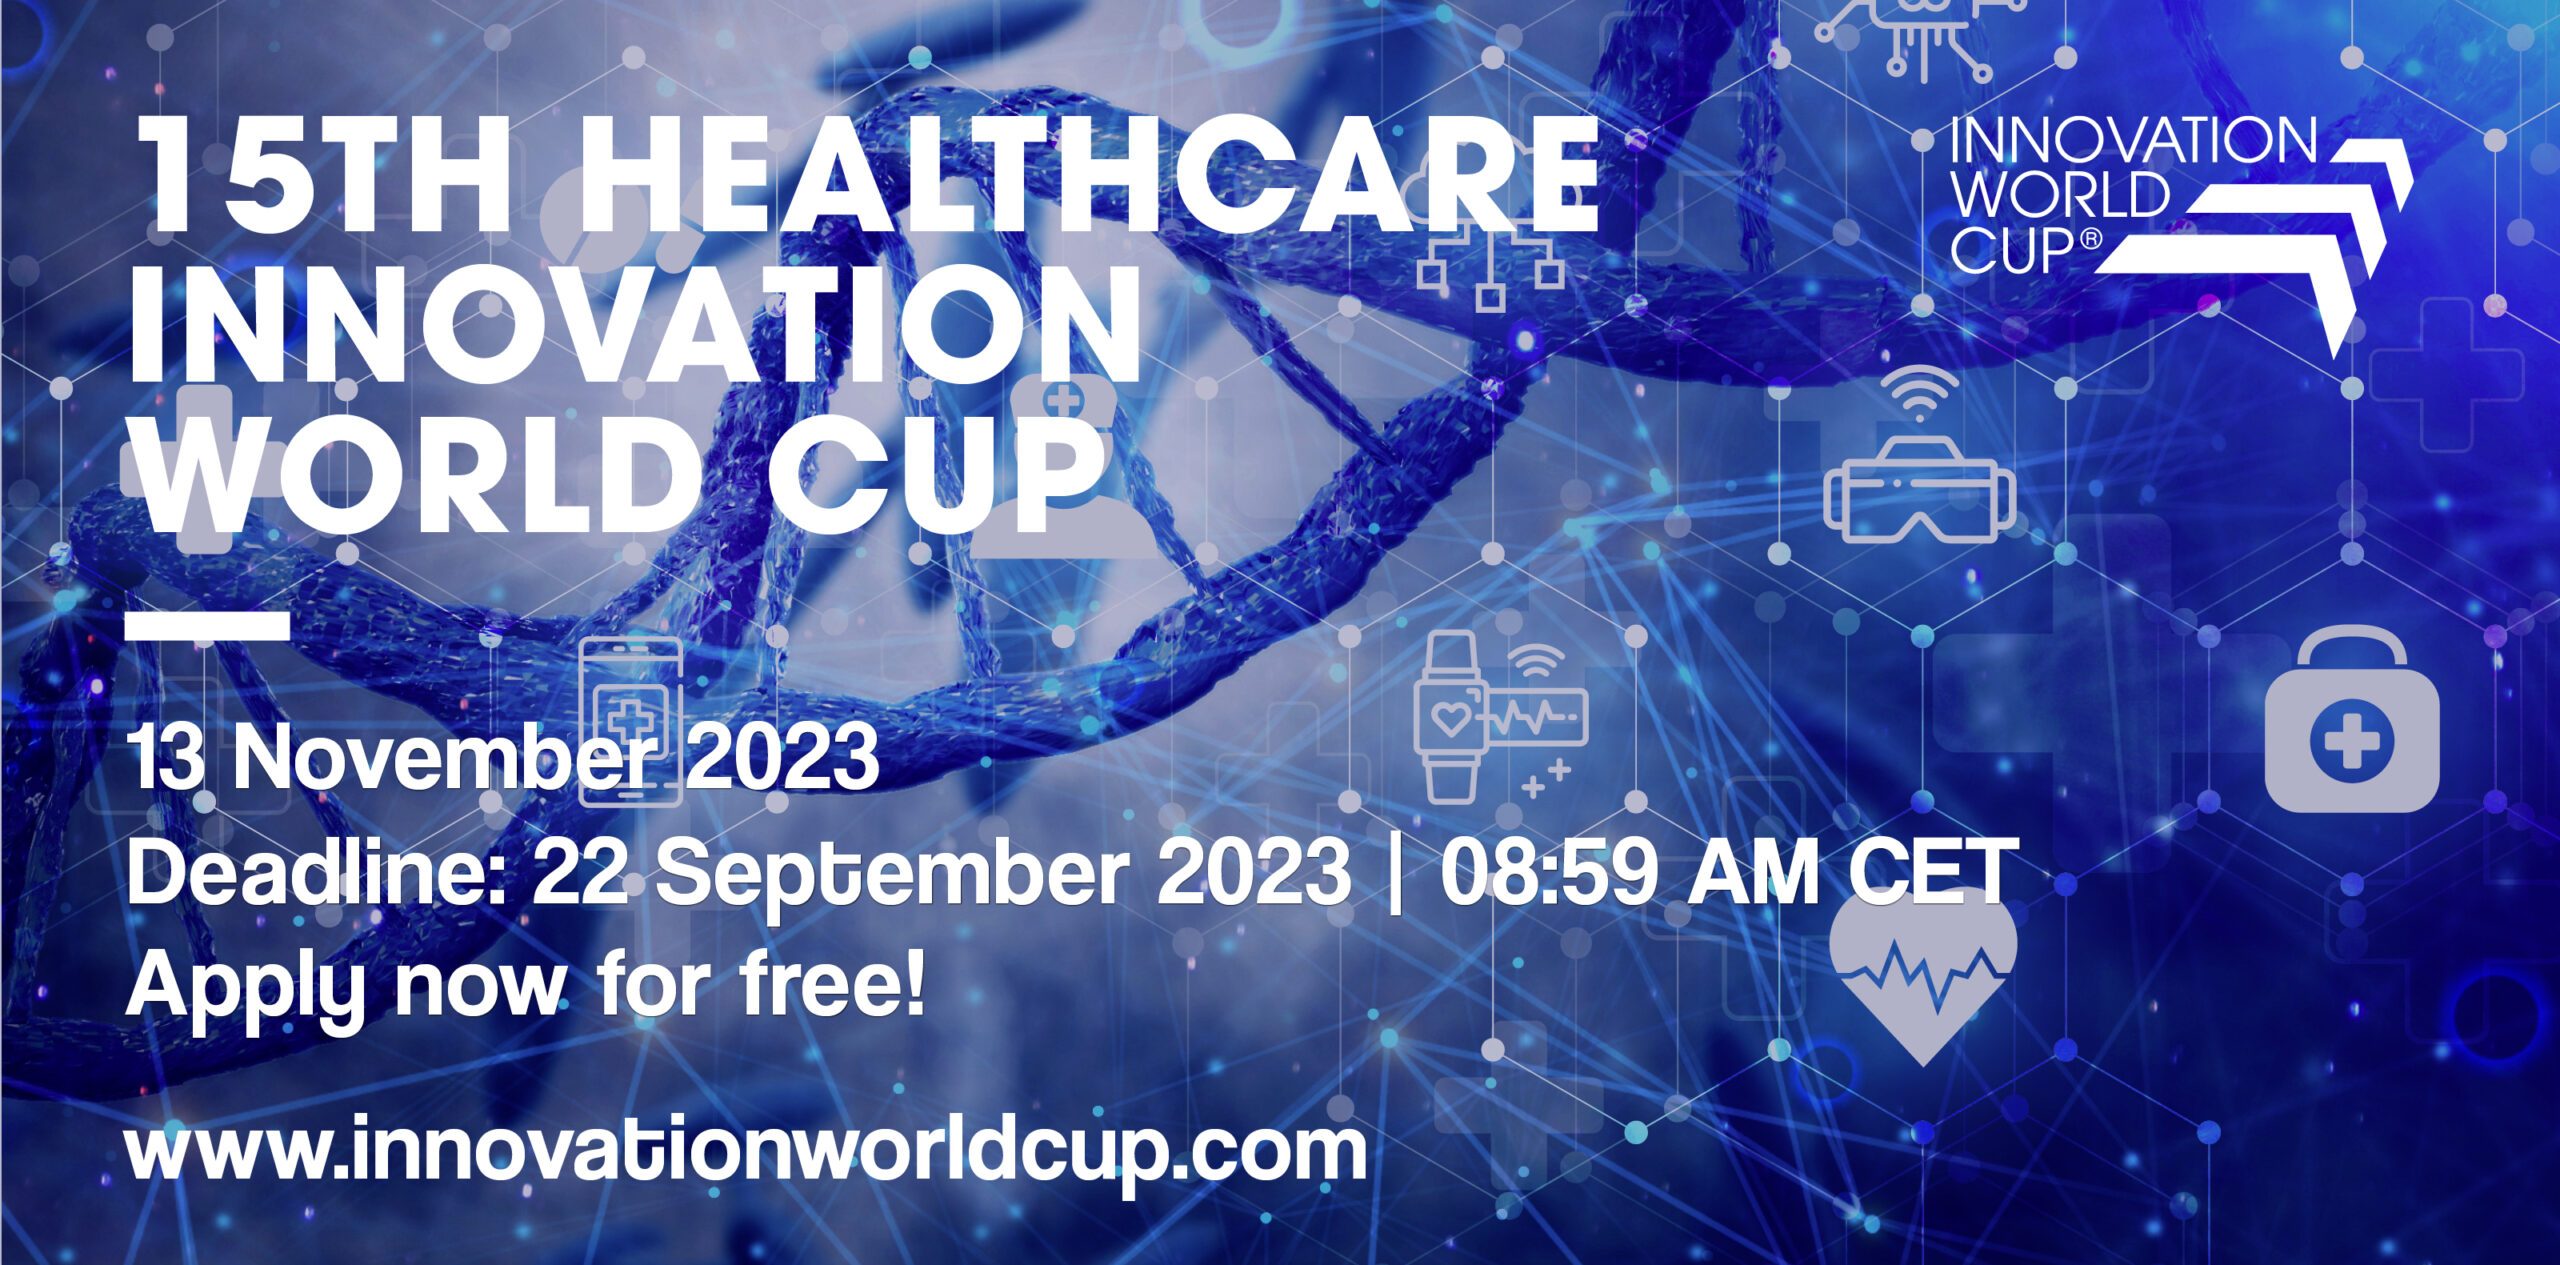 15th Healthcare Innovation World Cup